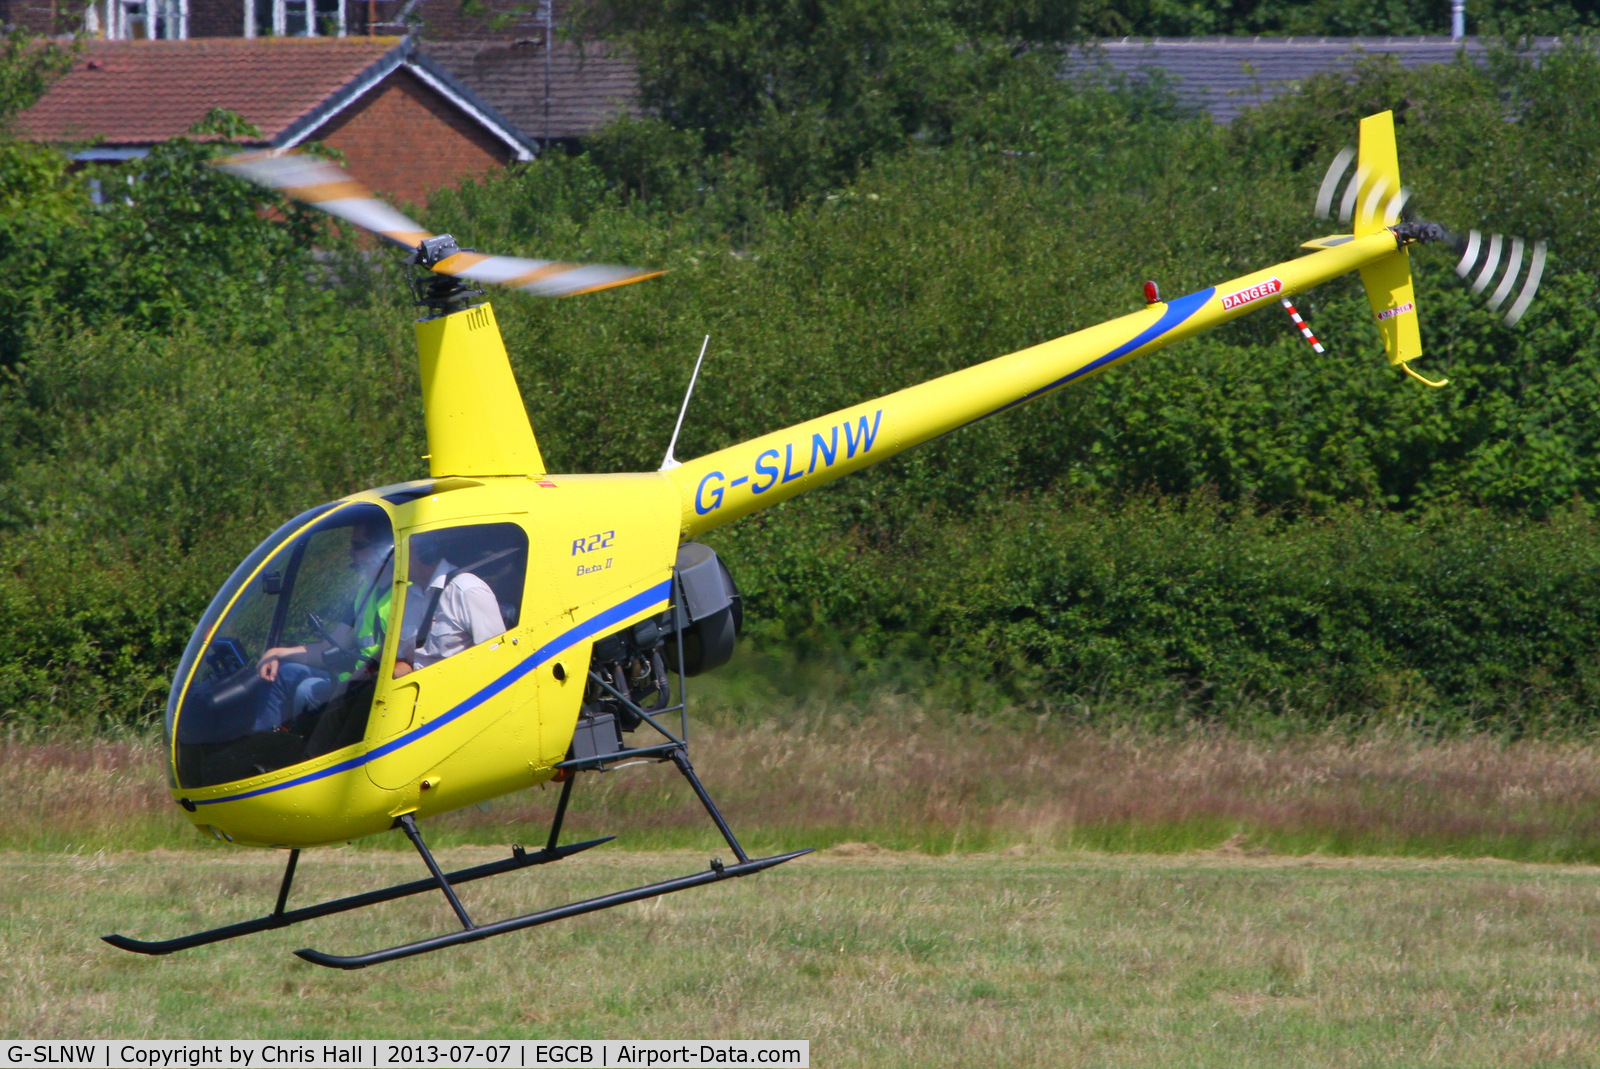 G-SLNW, 2003 Robinson R22 Beta II C/N 3524, at the Barton open day and fly in